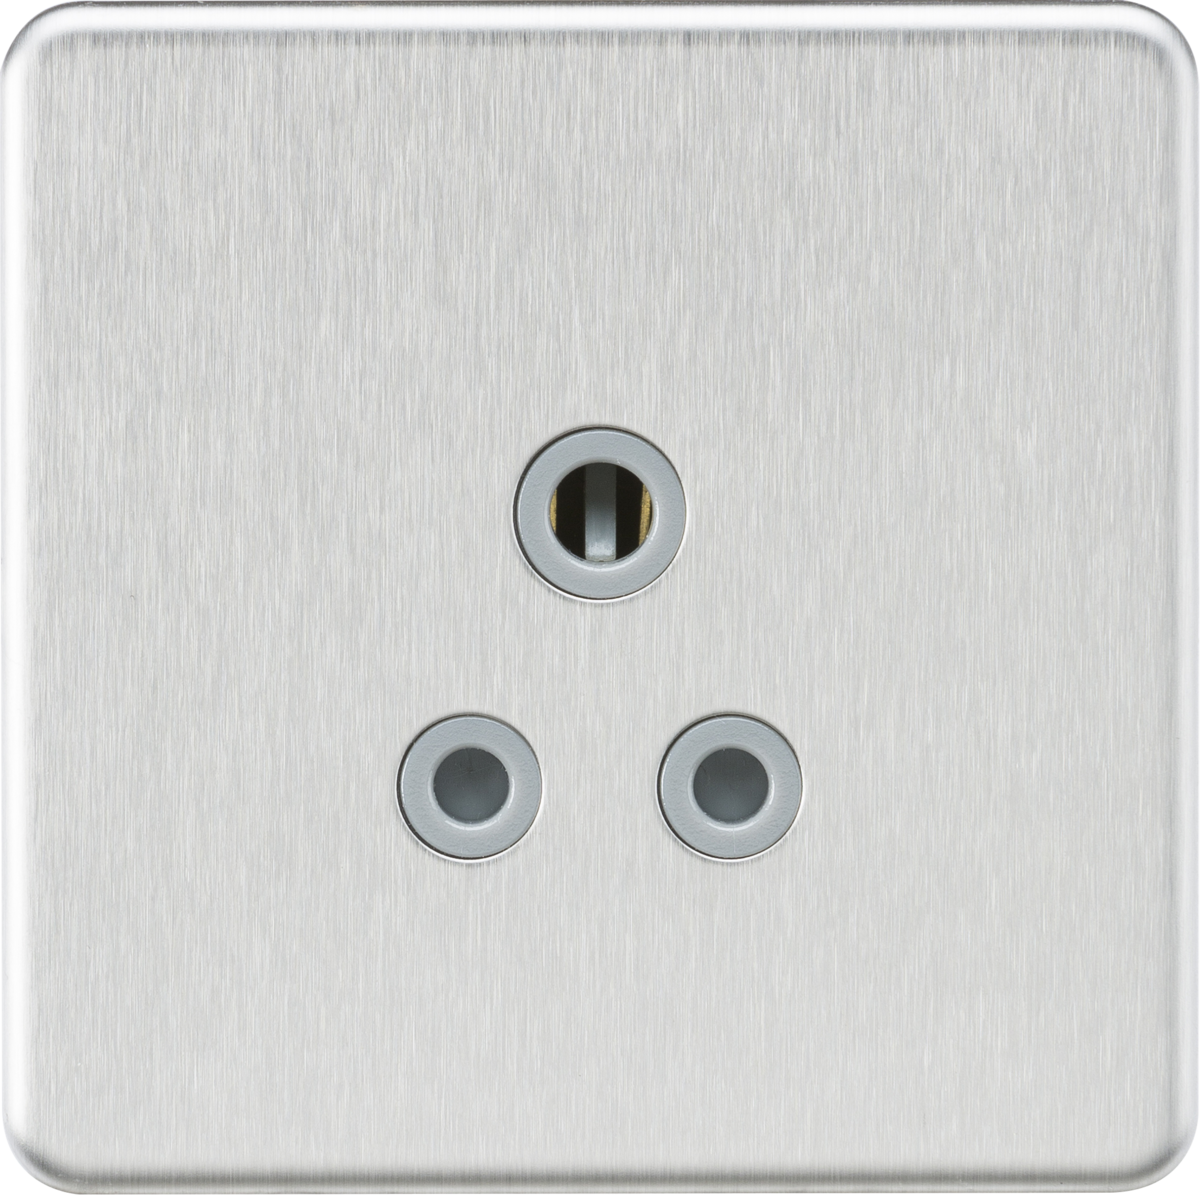 Screwless 5A Unswitched Round Socket - Brushed Chrome with Grey Insert